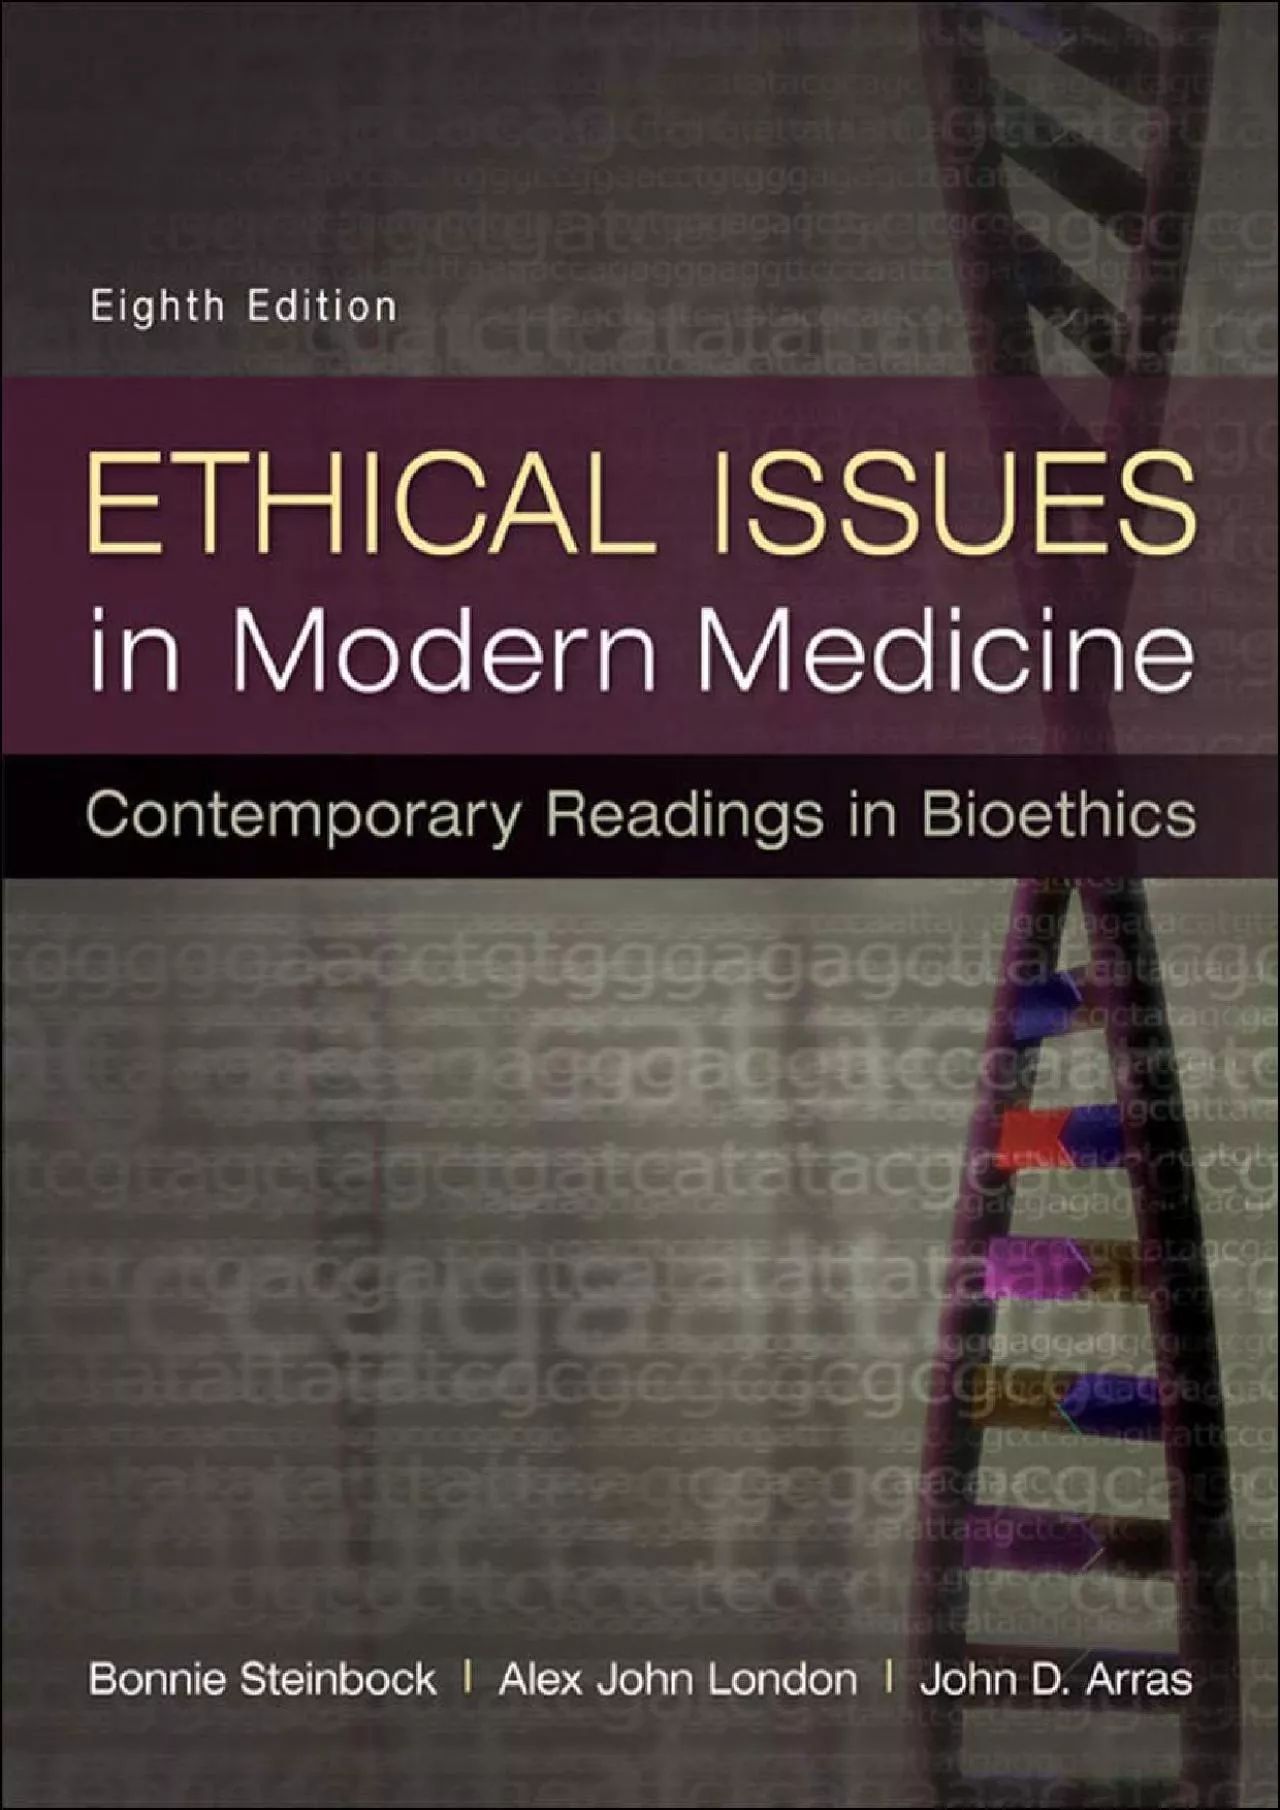 (BOOK)-Ethical Issues in Modern Medicine: Contemporary Readings in Bioethics